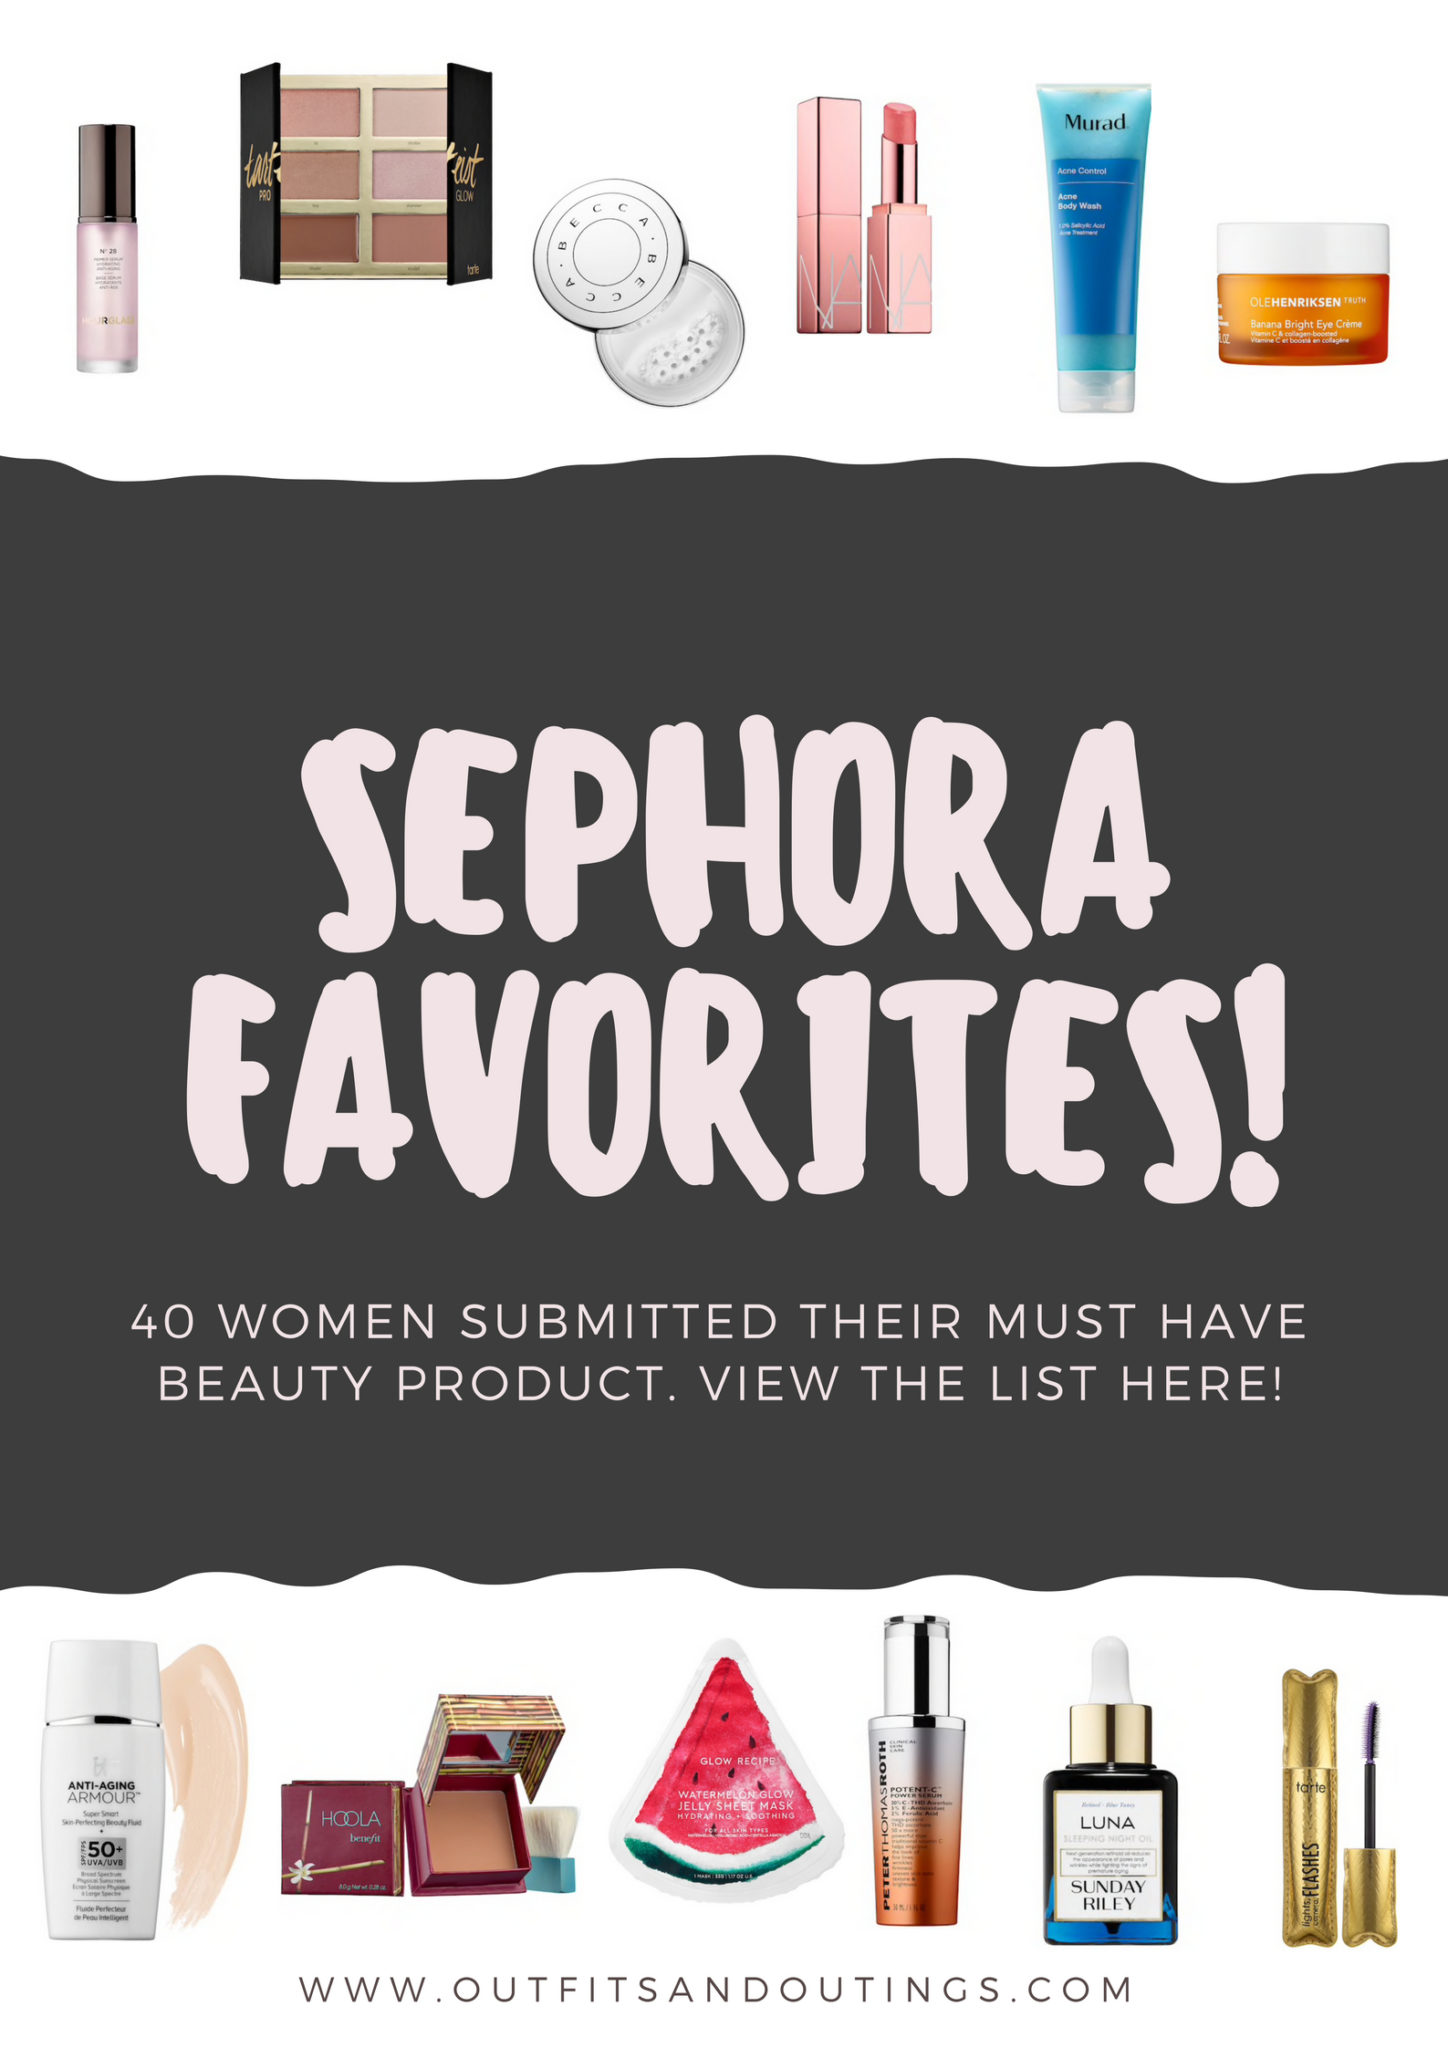 Sephora Favorites featured by popular Las Vegas beauty blogger, Outfits & Outings